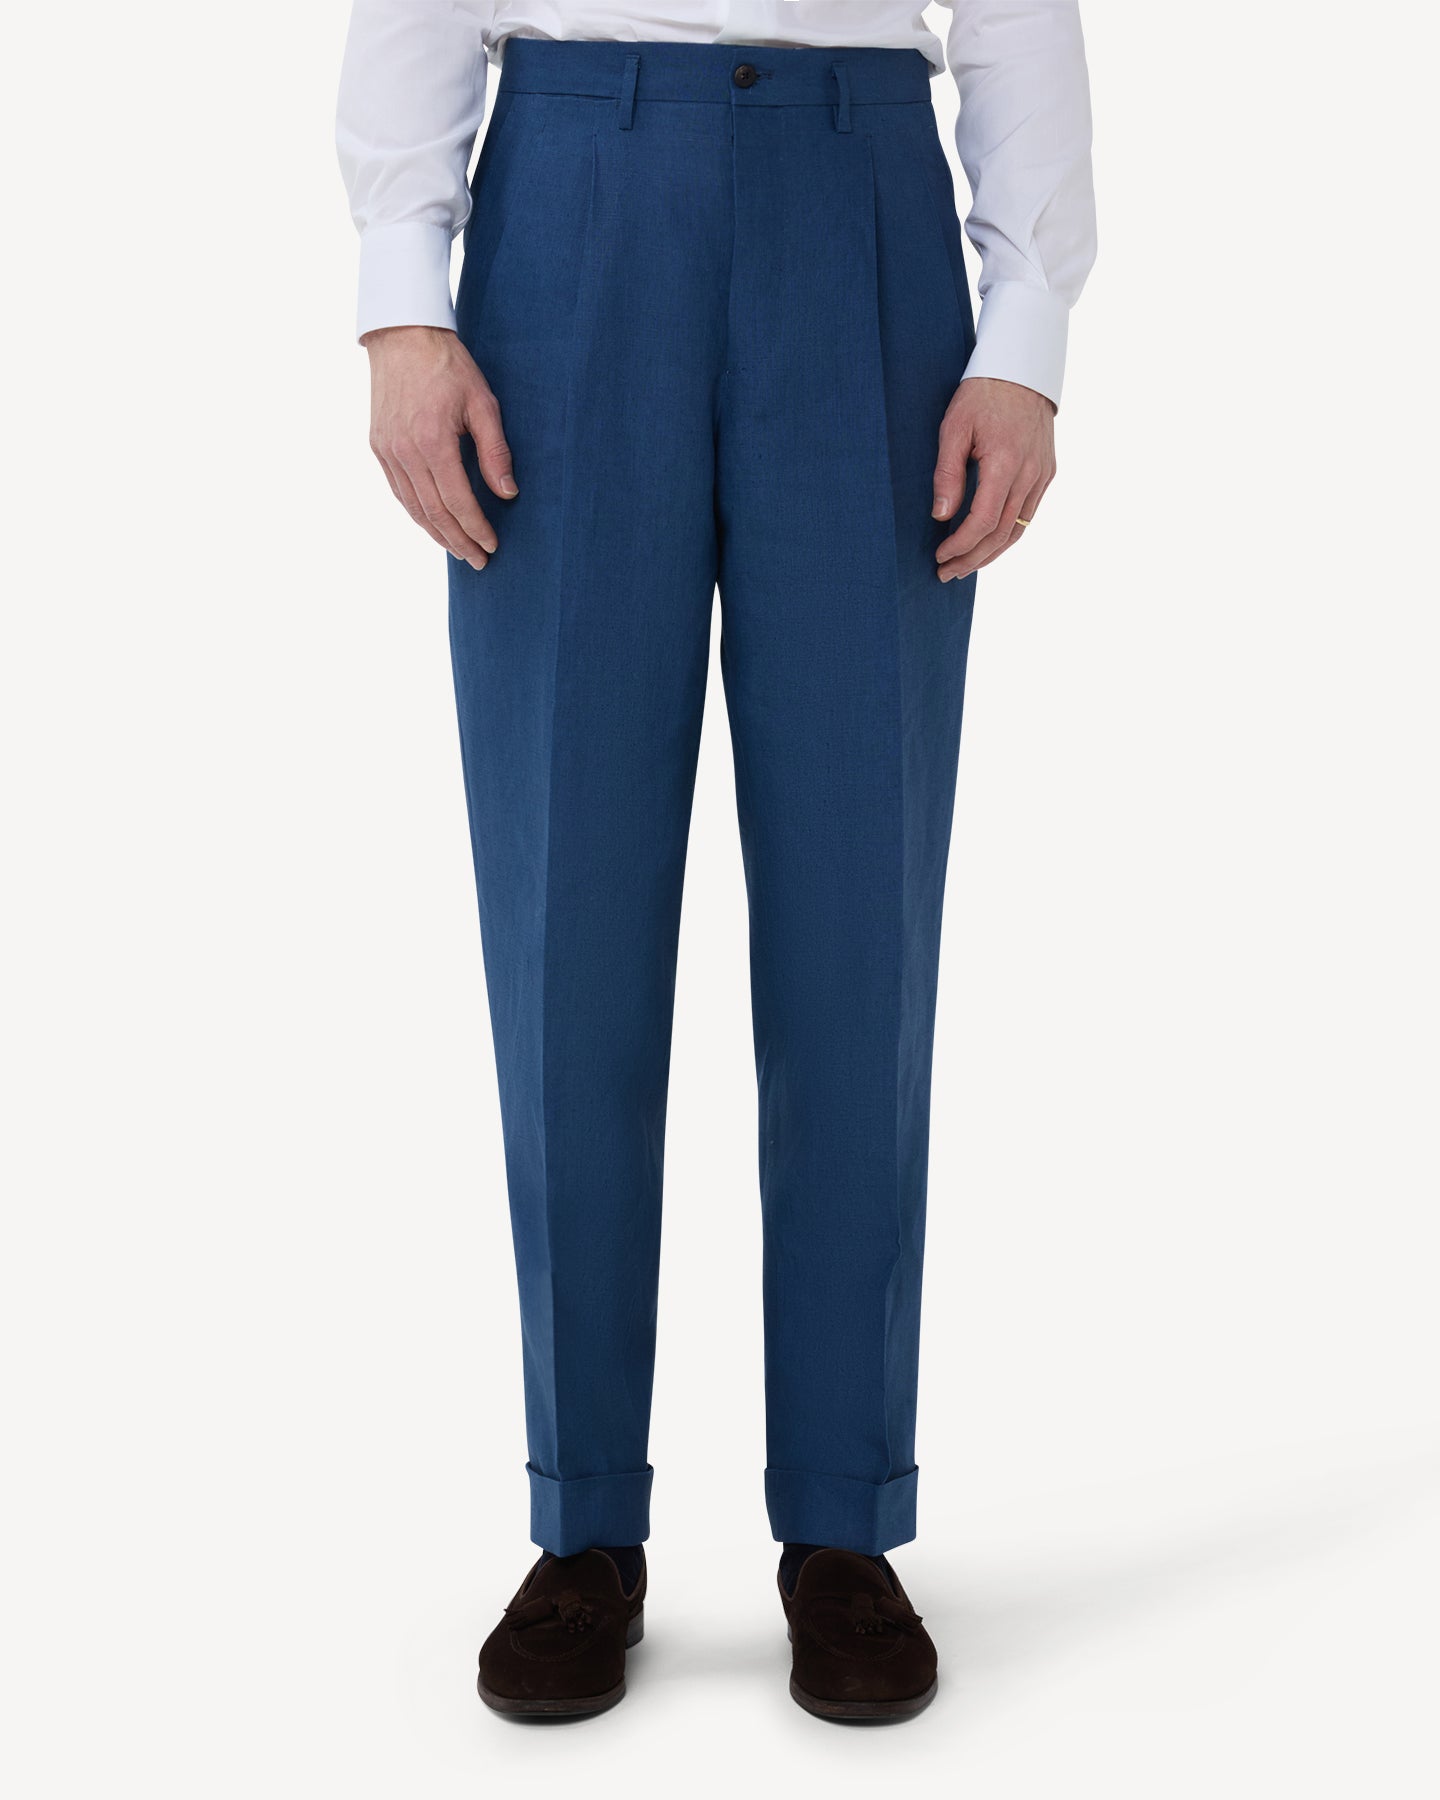 The front of blueberry linen trousers with double pleats and belt loops